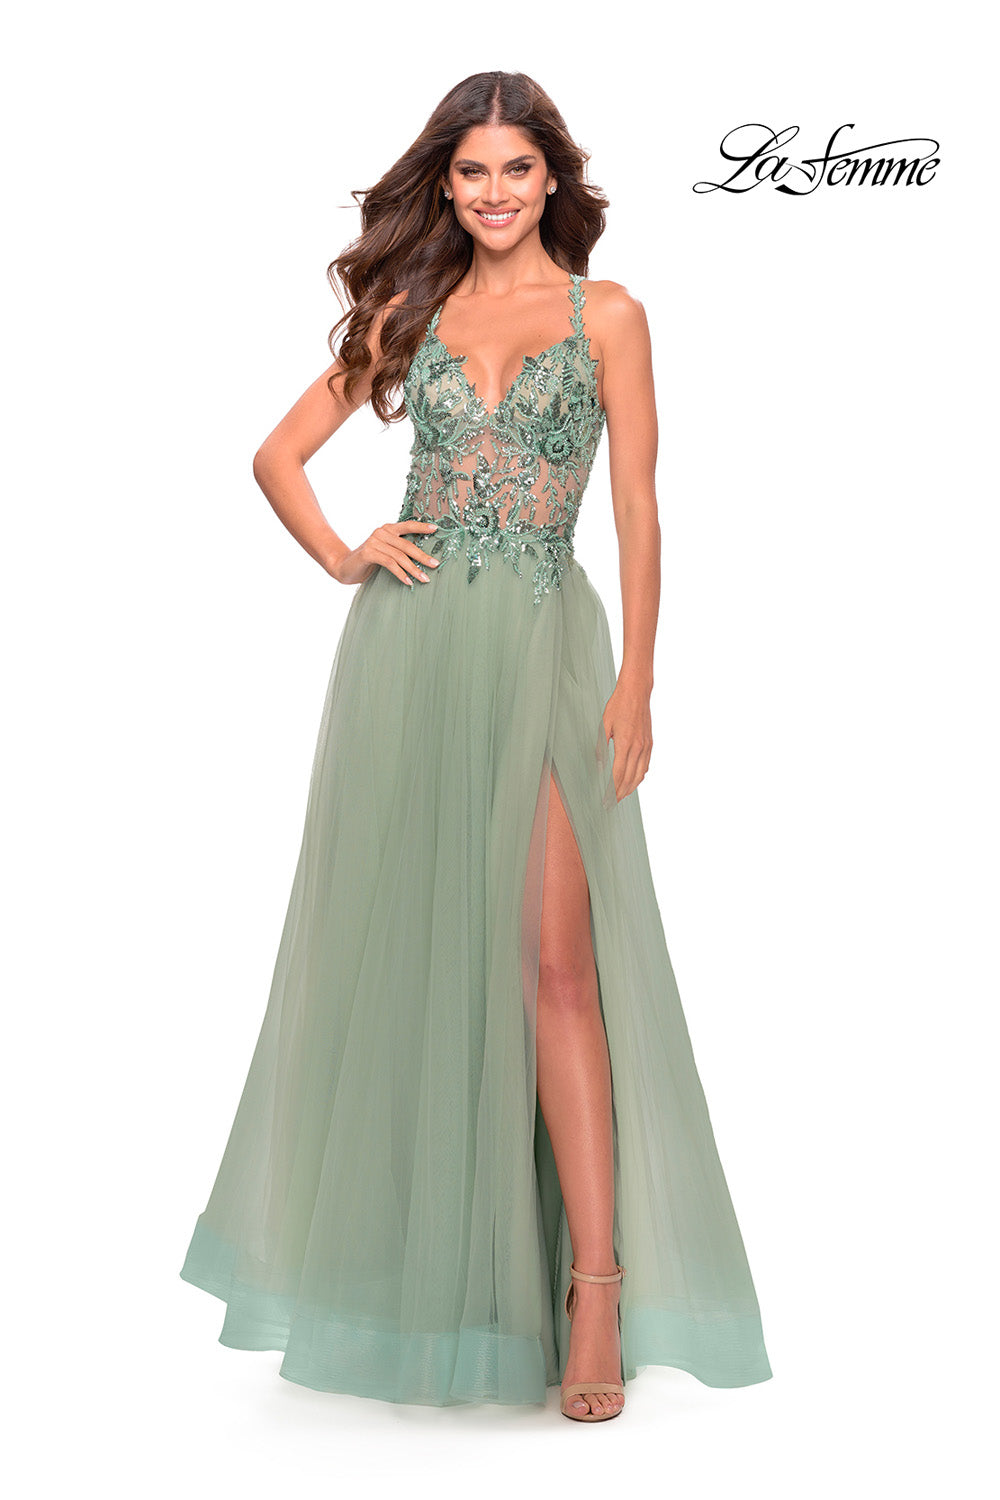 La Femme 31369 prom dress images.  La Femme 31369 is available in these colors: Light Periwinkle, Sage.